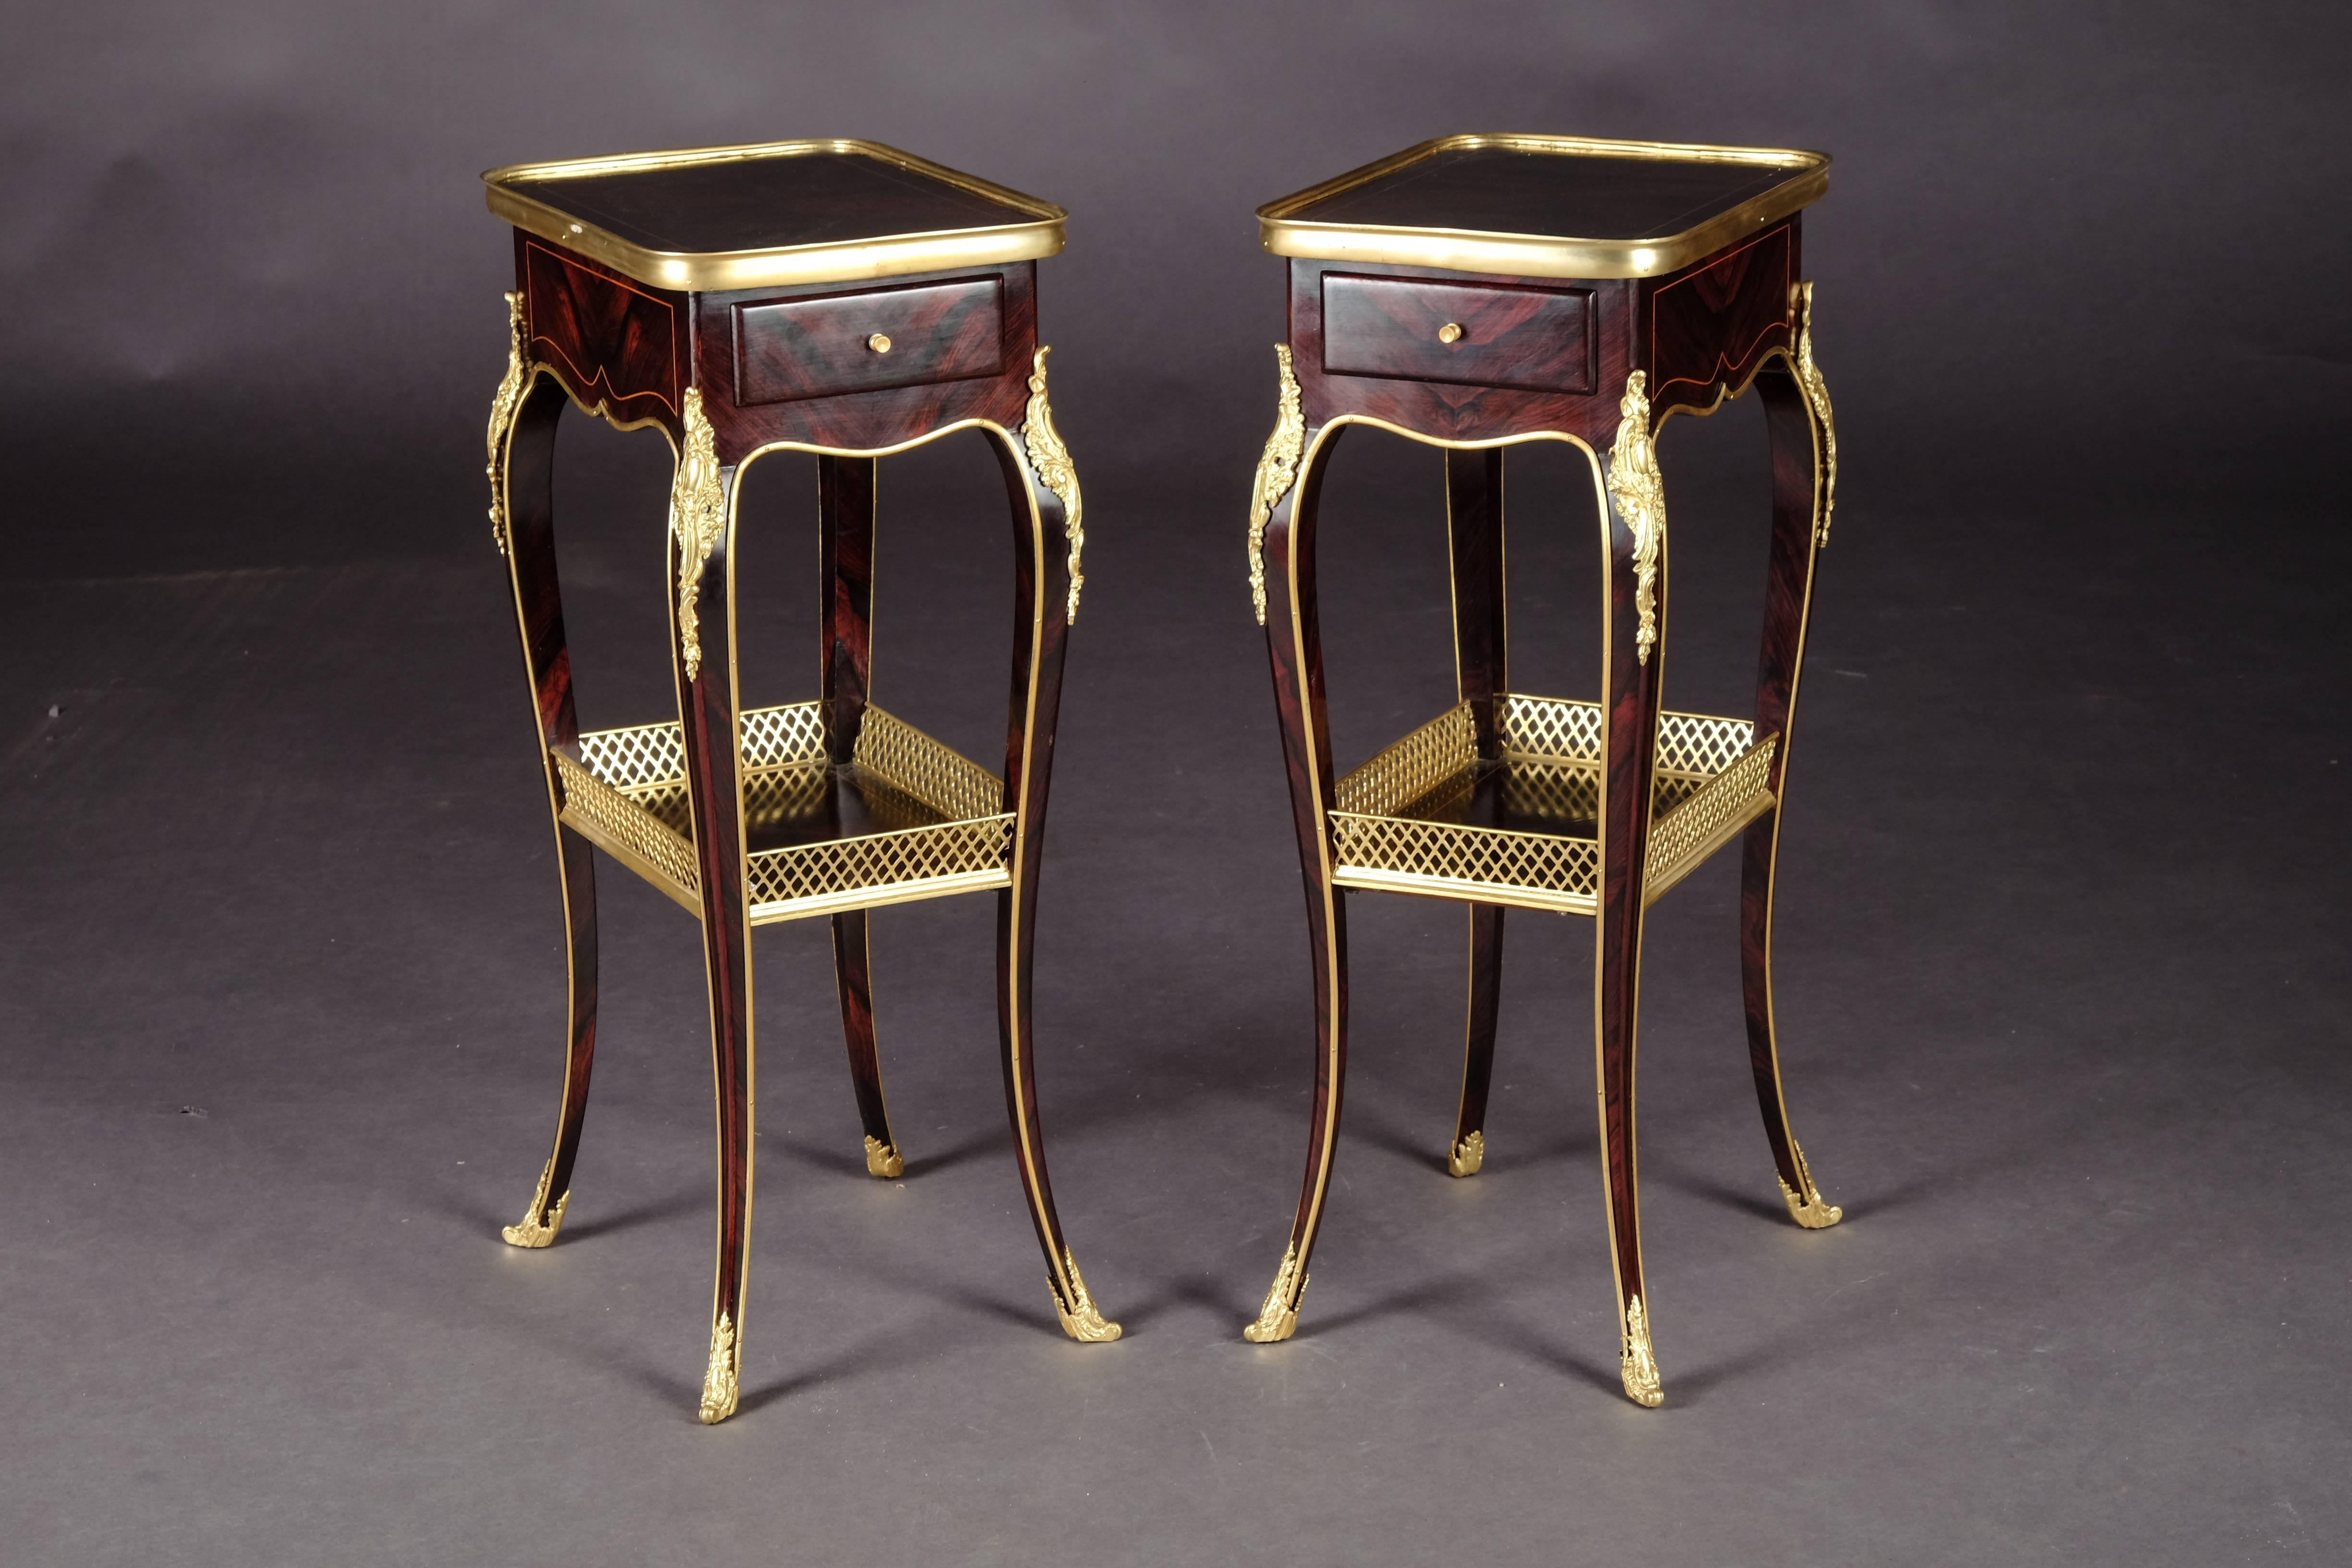 Polished Palisander on solid beech wood. Very fine, floral, bronze fittings. Embracing frame box on high slightly curved legs with intermediate tray connected in sabots. Slightly protruding top plate in brass frame. Beautiful patina, with shellac